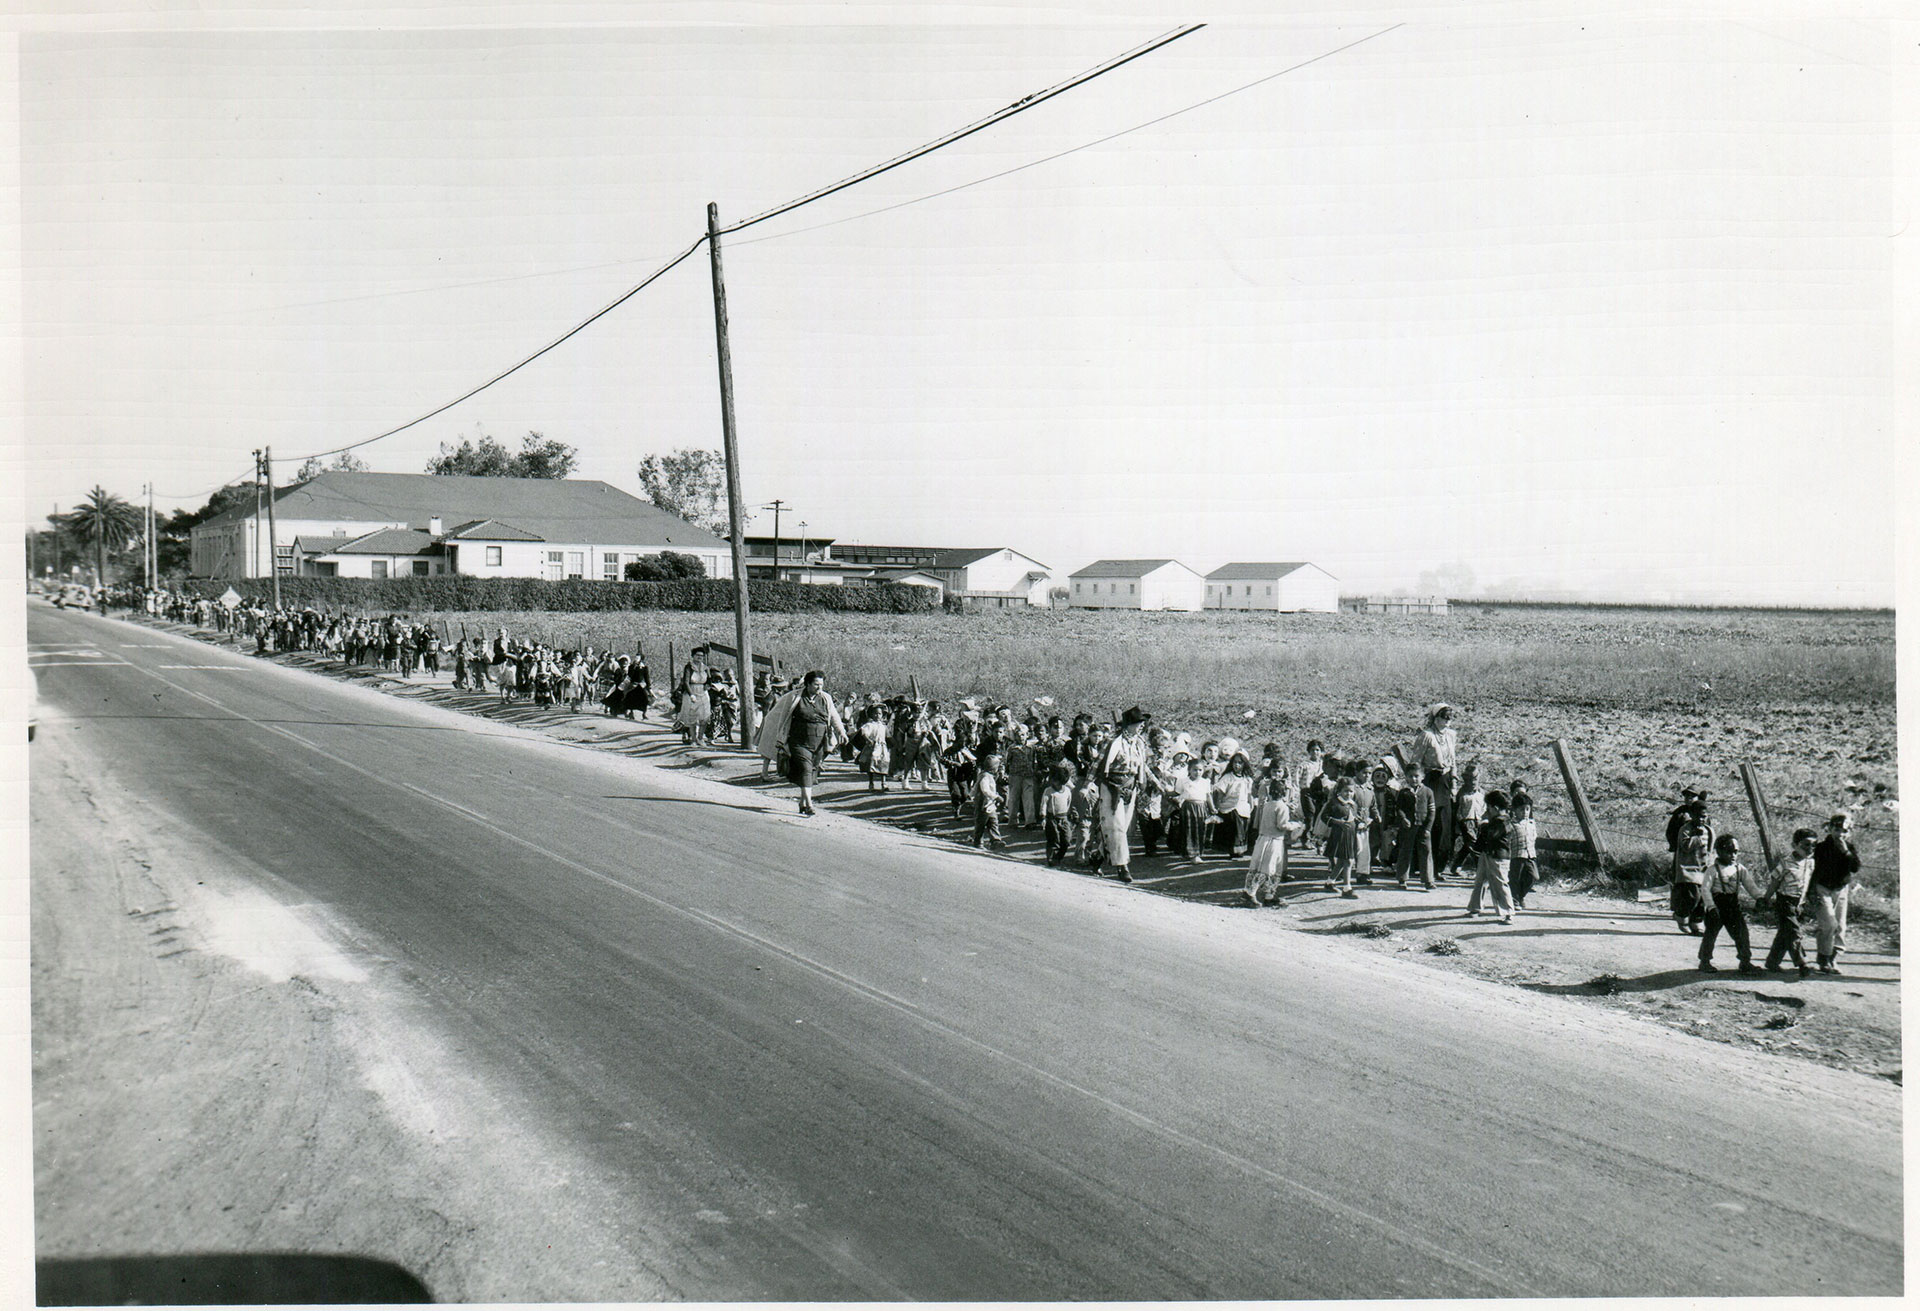 Black and white photo of about fifty children and several adults walking next to a road and a field. The children are dressed up as if for Halloween.